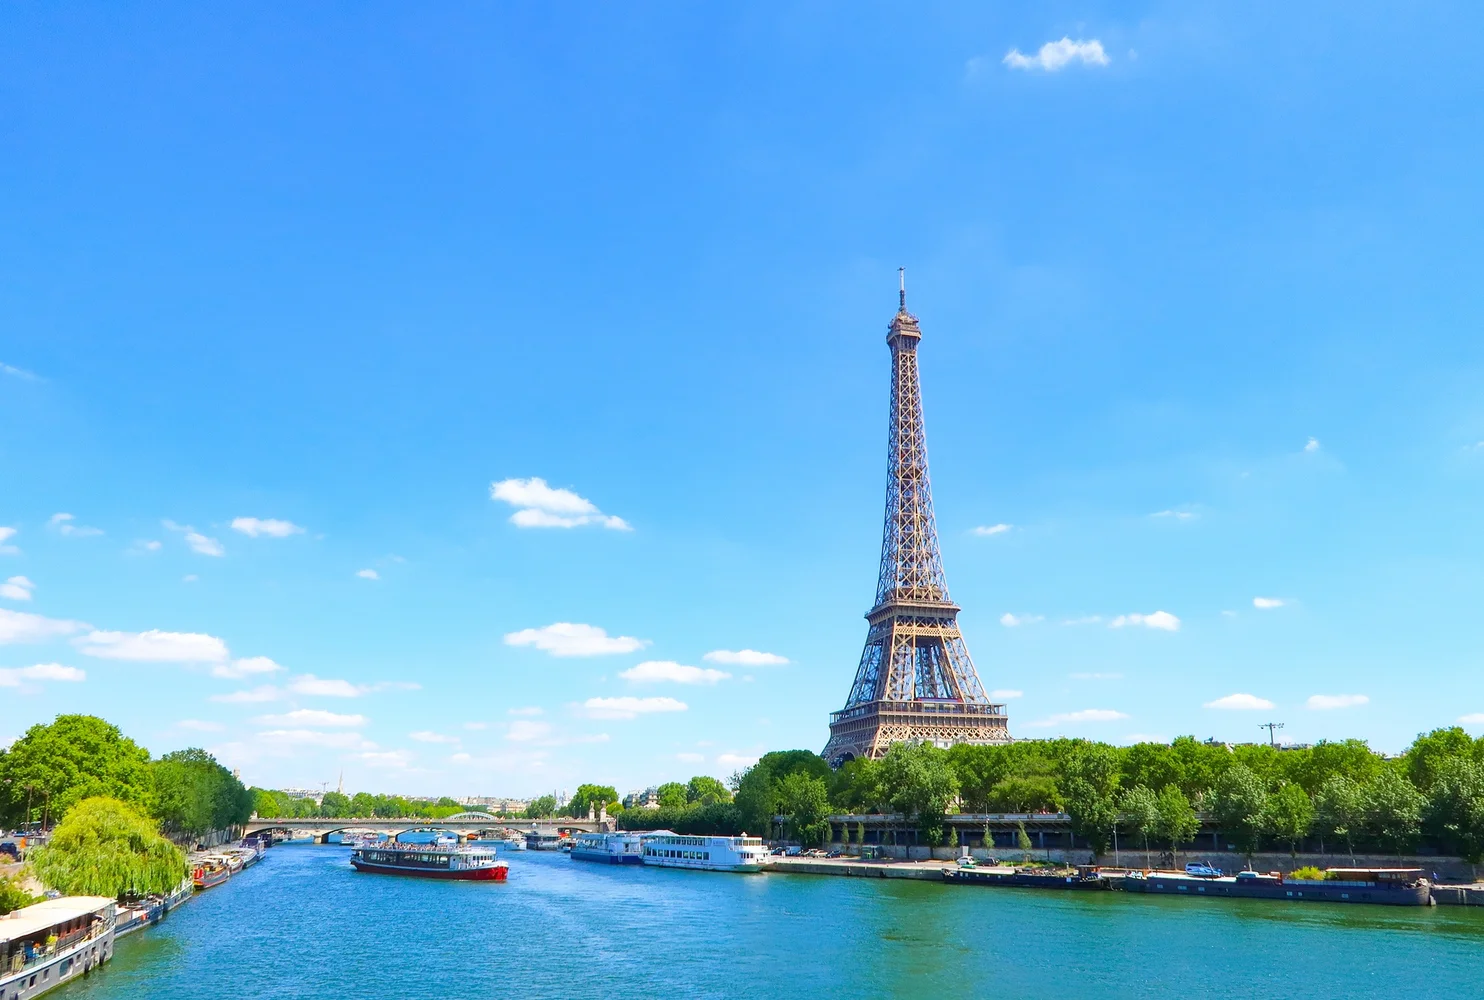 Eiffel Tower Summit Tickets – Priority Entrance + Audio Guide